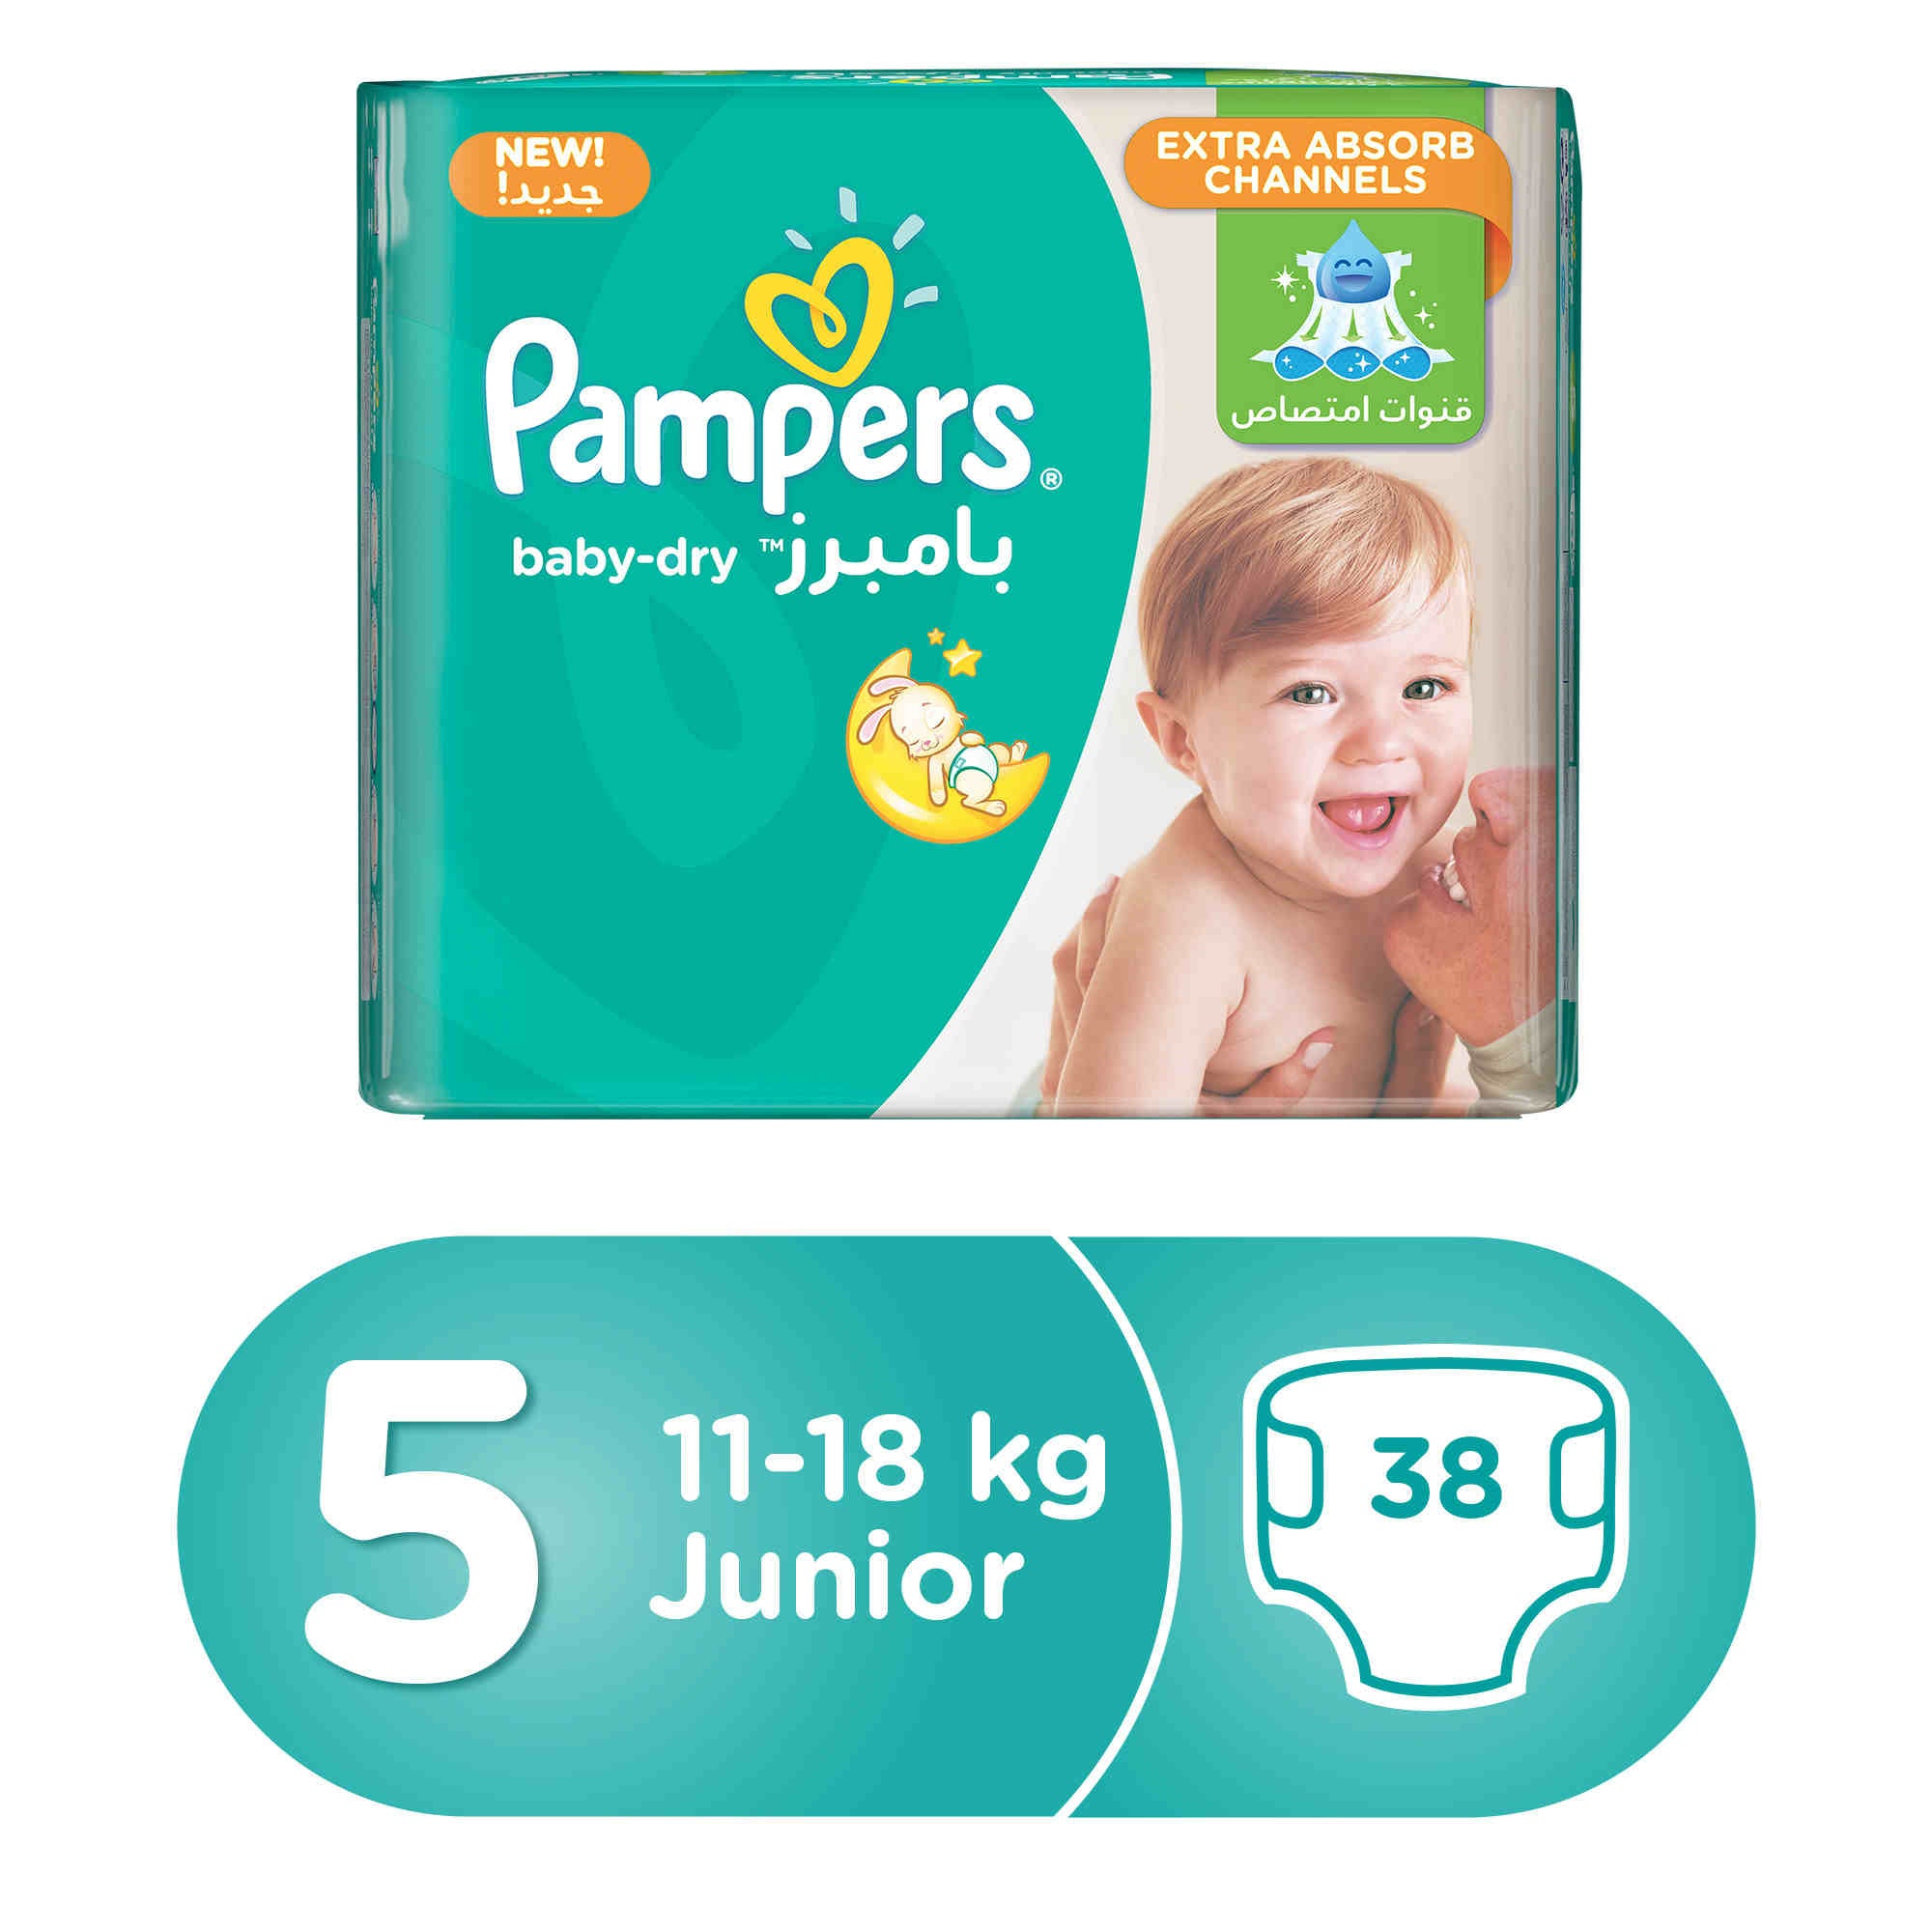 Active Baby Dry Diapers, Value Pack, Junior, Size 5, 11-18 kg, 38 Diapers - MazenOnline